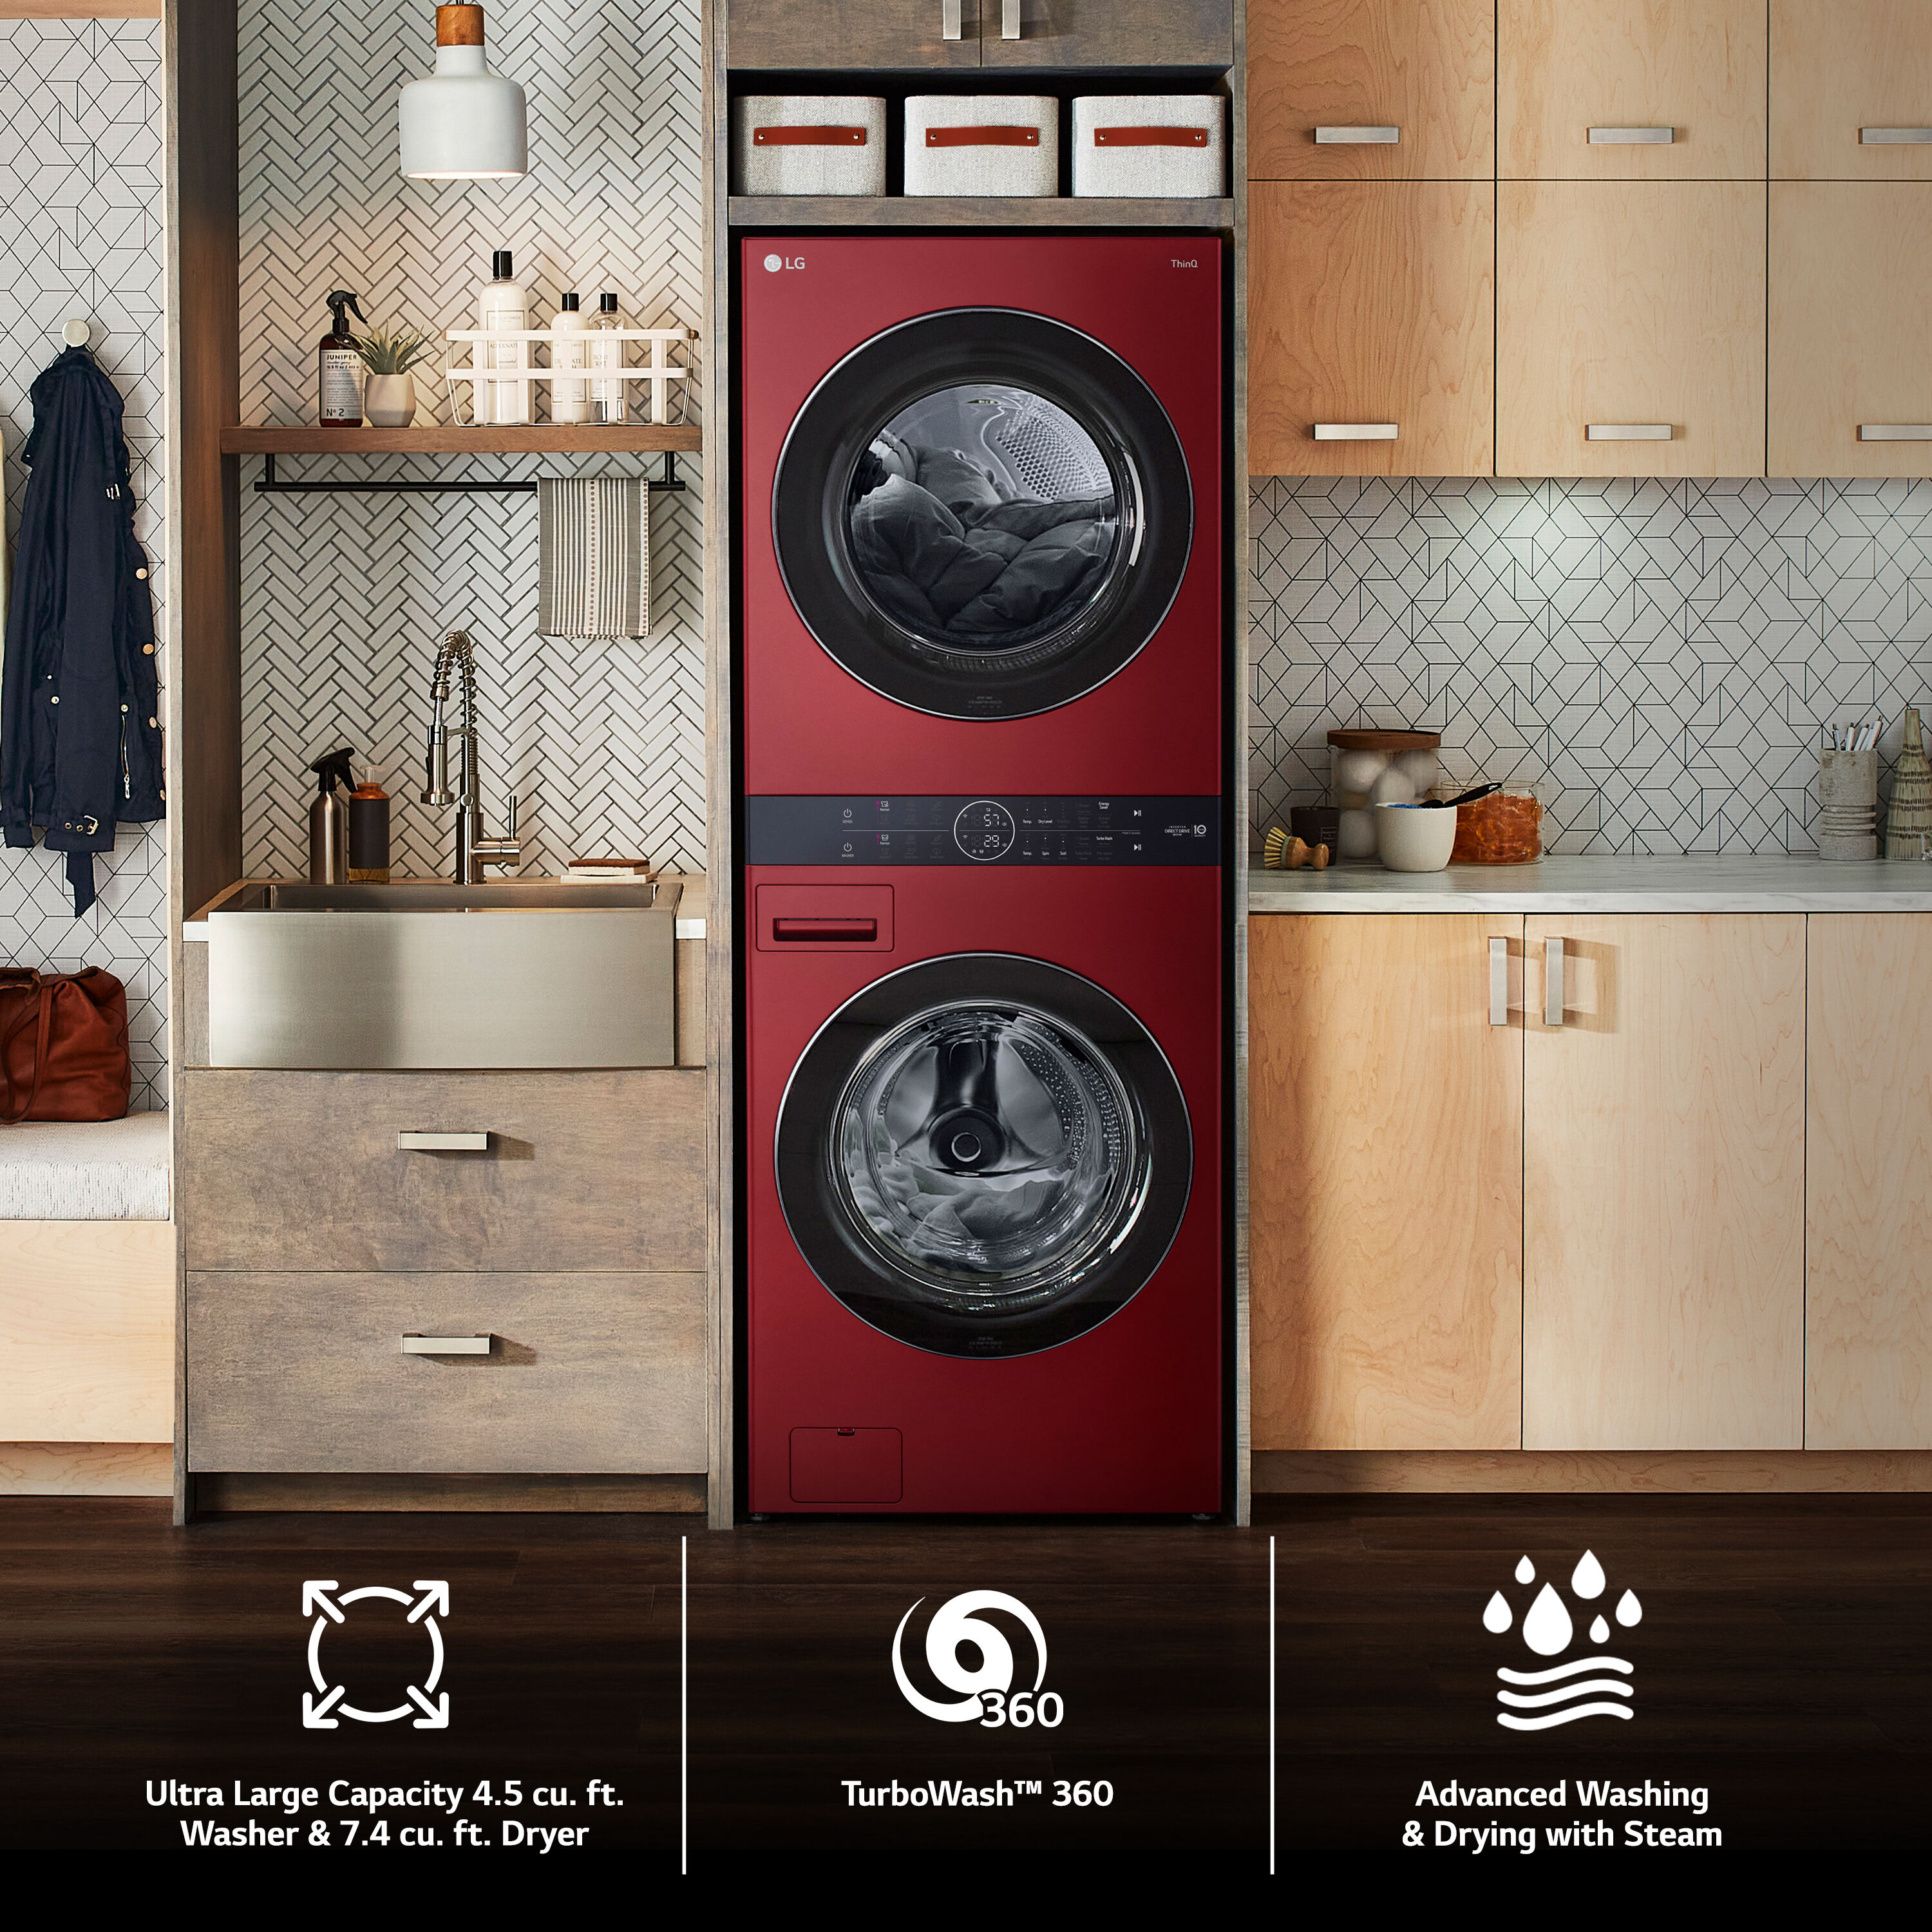 7.4-cu in Laundry Washer Stacked with Centers Laundry 4.5-cu at (ENERGY Center department Dryer WashTower Electric ft and Stacked LG the STAR) ft